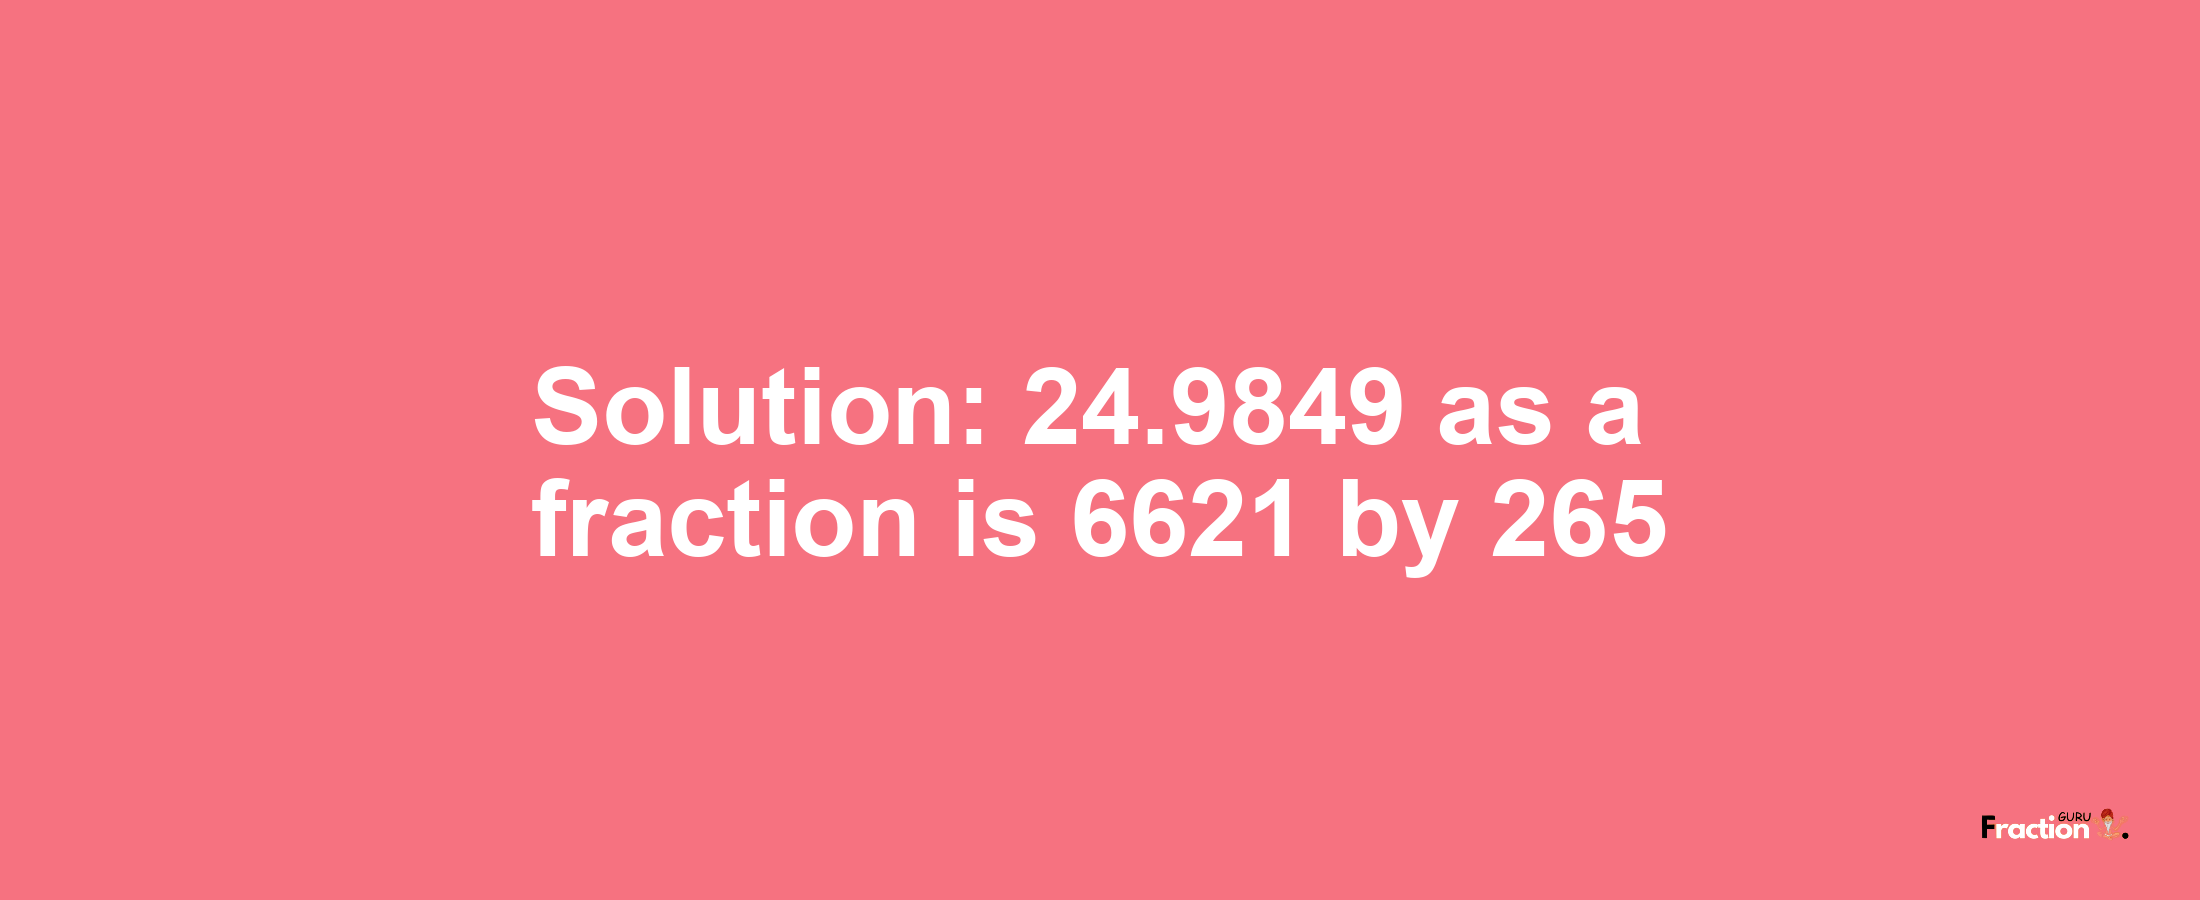 Solution:24.9849 as a fraction is 6621/265